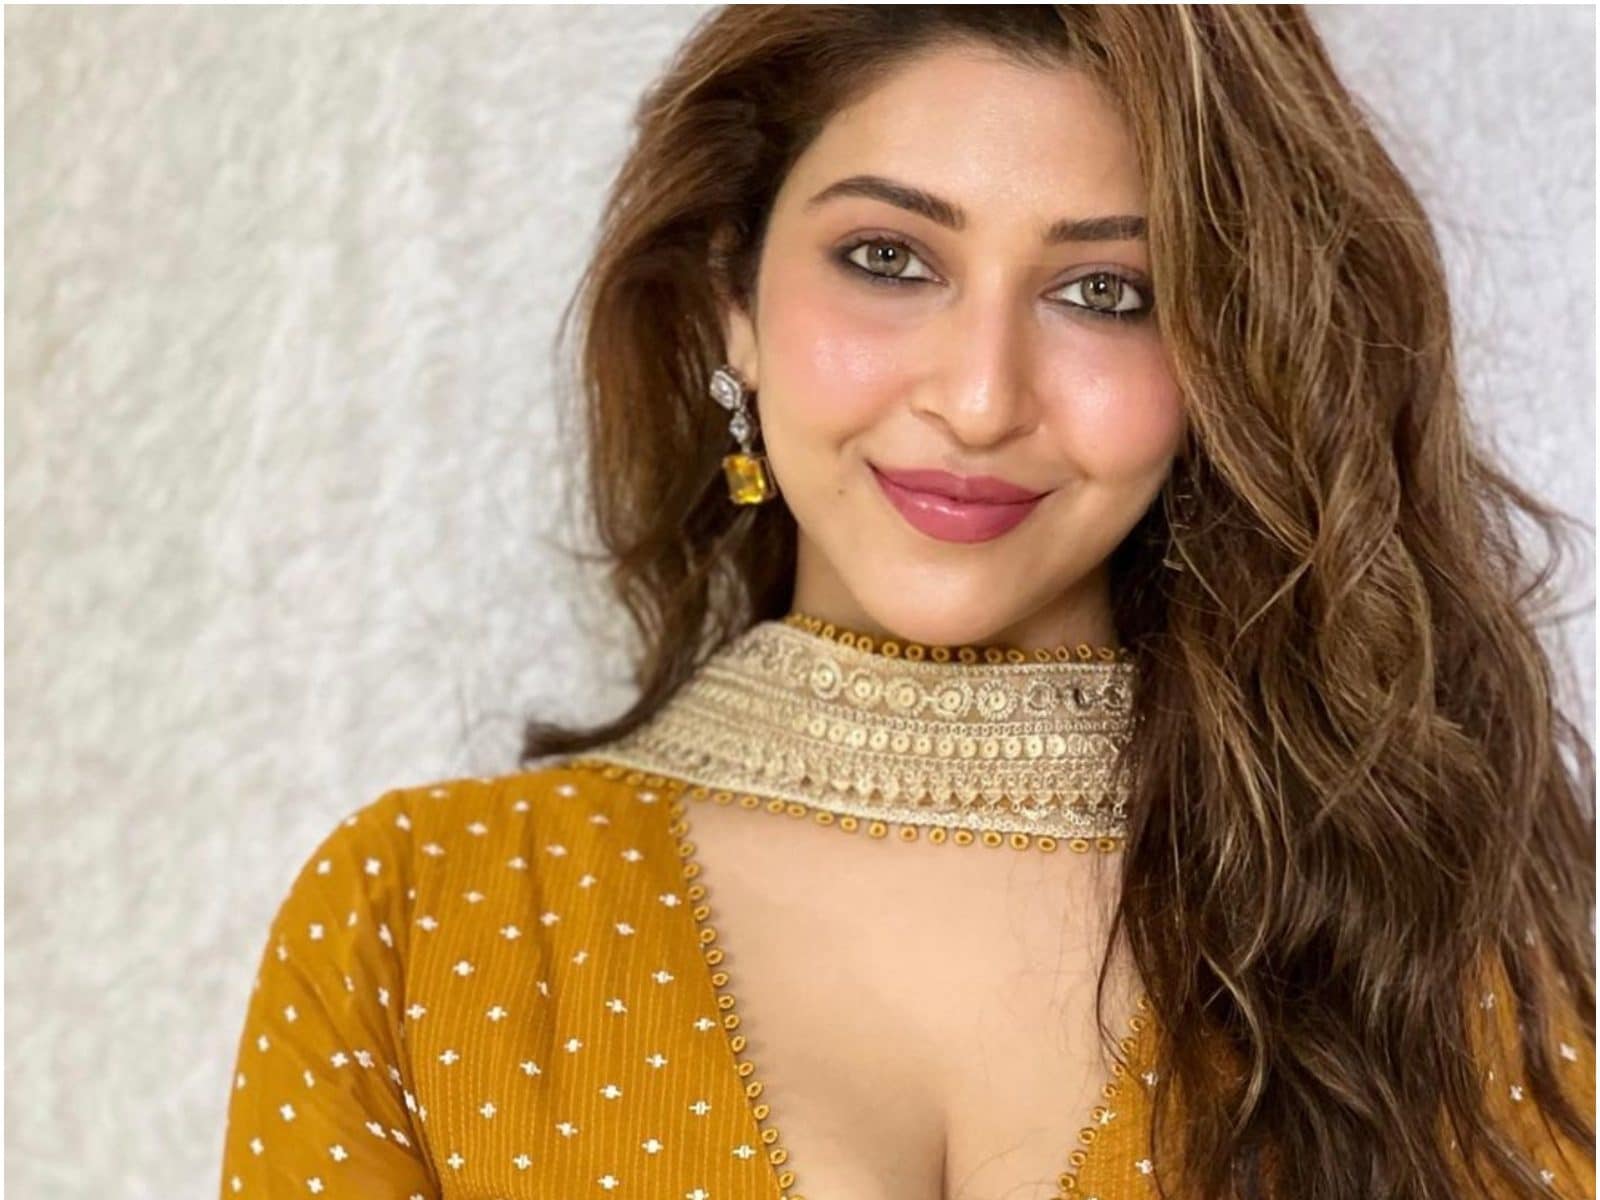 Sonarika Bhadoriaxxx - Sonarika Bhadoria Excited About Her Next Leg in Entertainment Industry:  'Starting My Second Innings' - News18